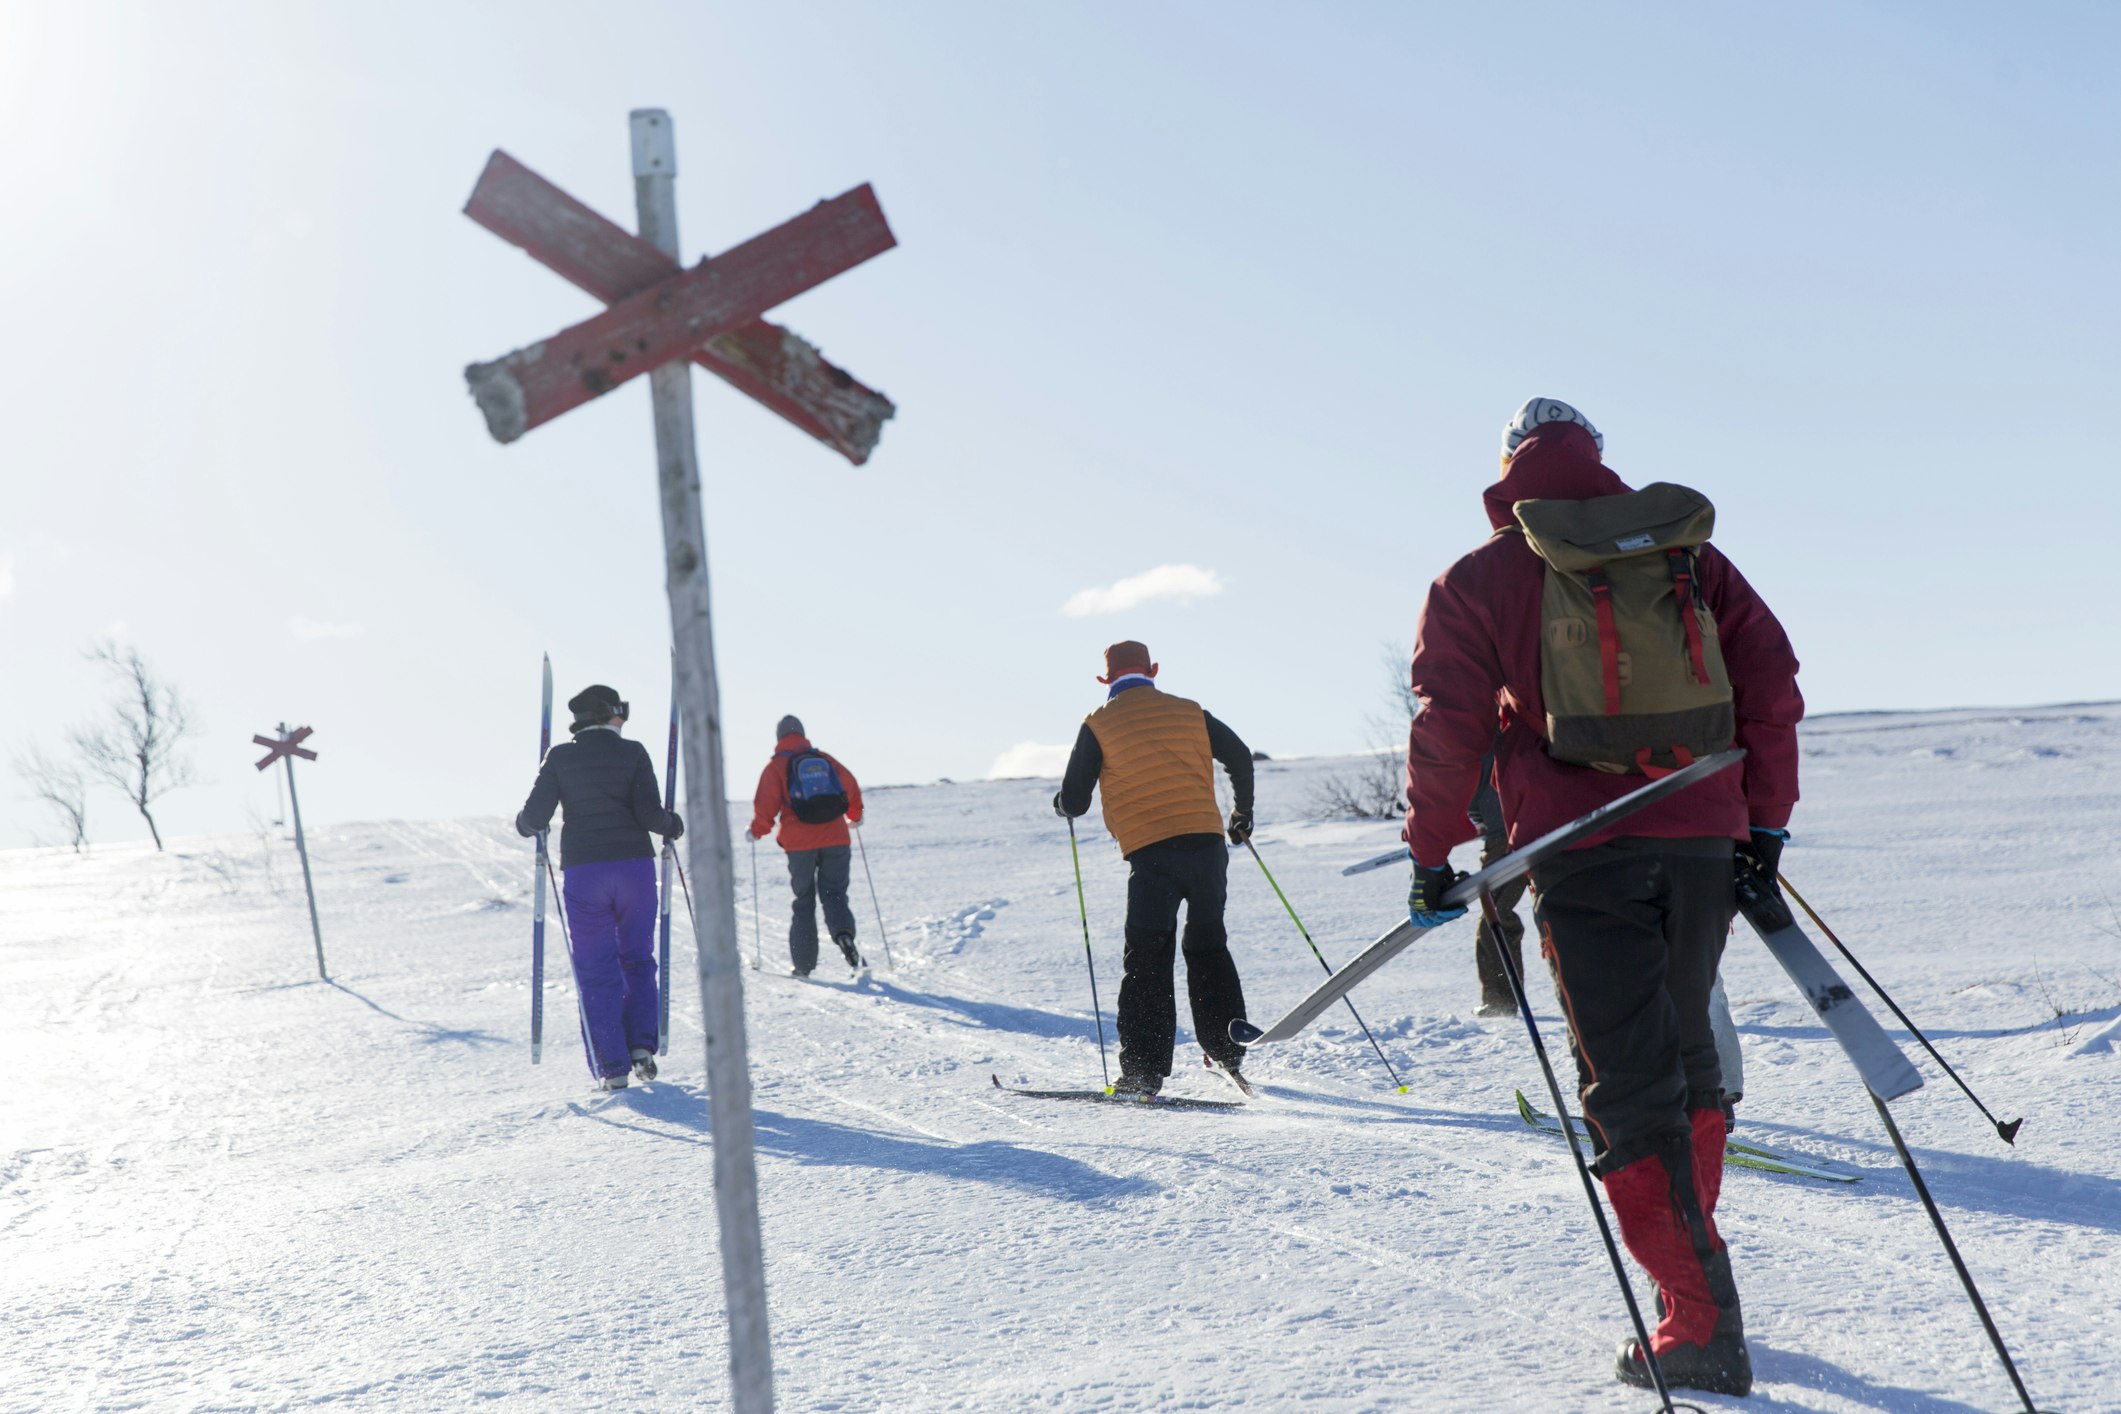 Four people in brightly-colored ski gear head uphill as they practice cross-country skiing